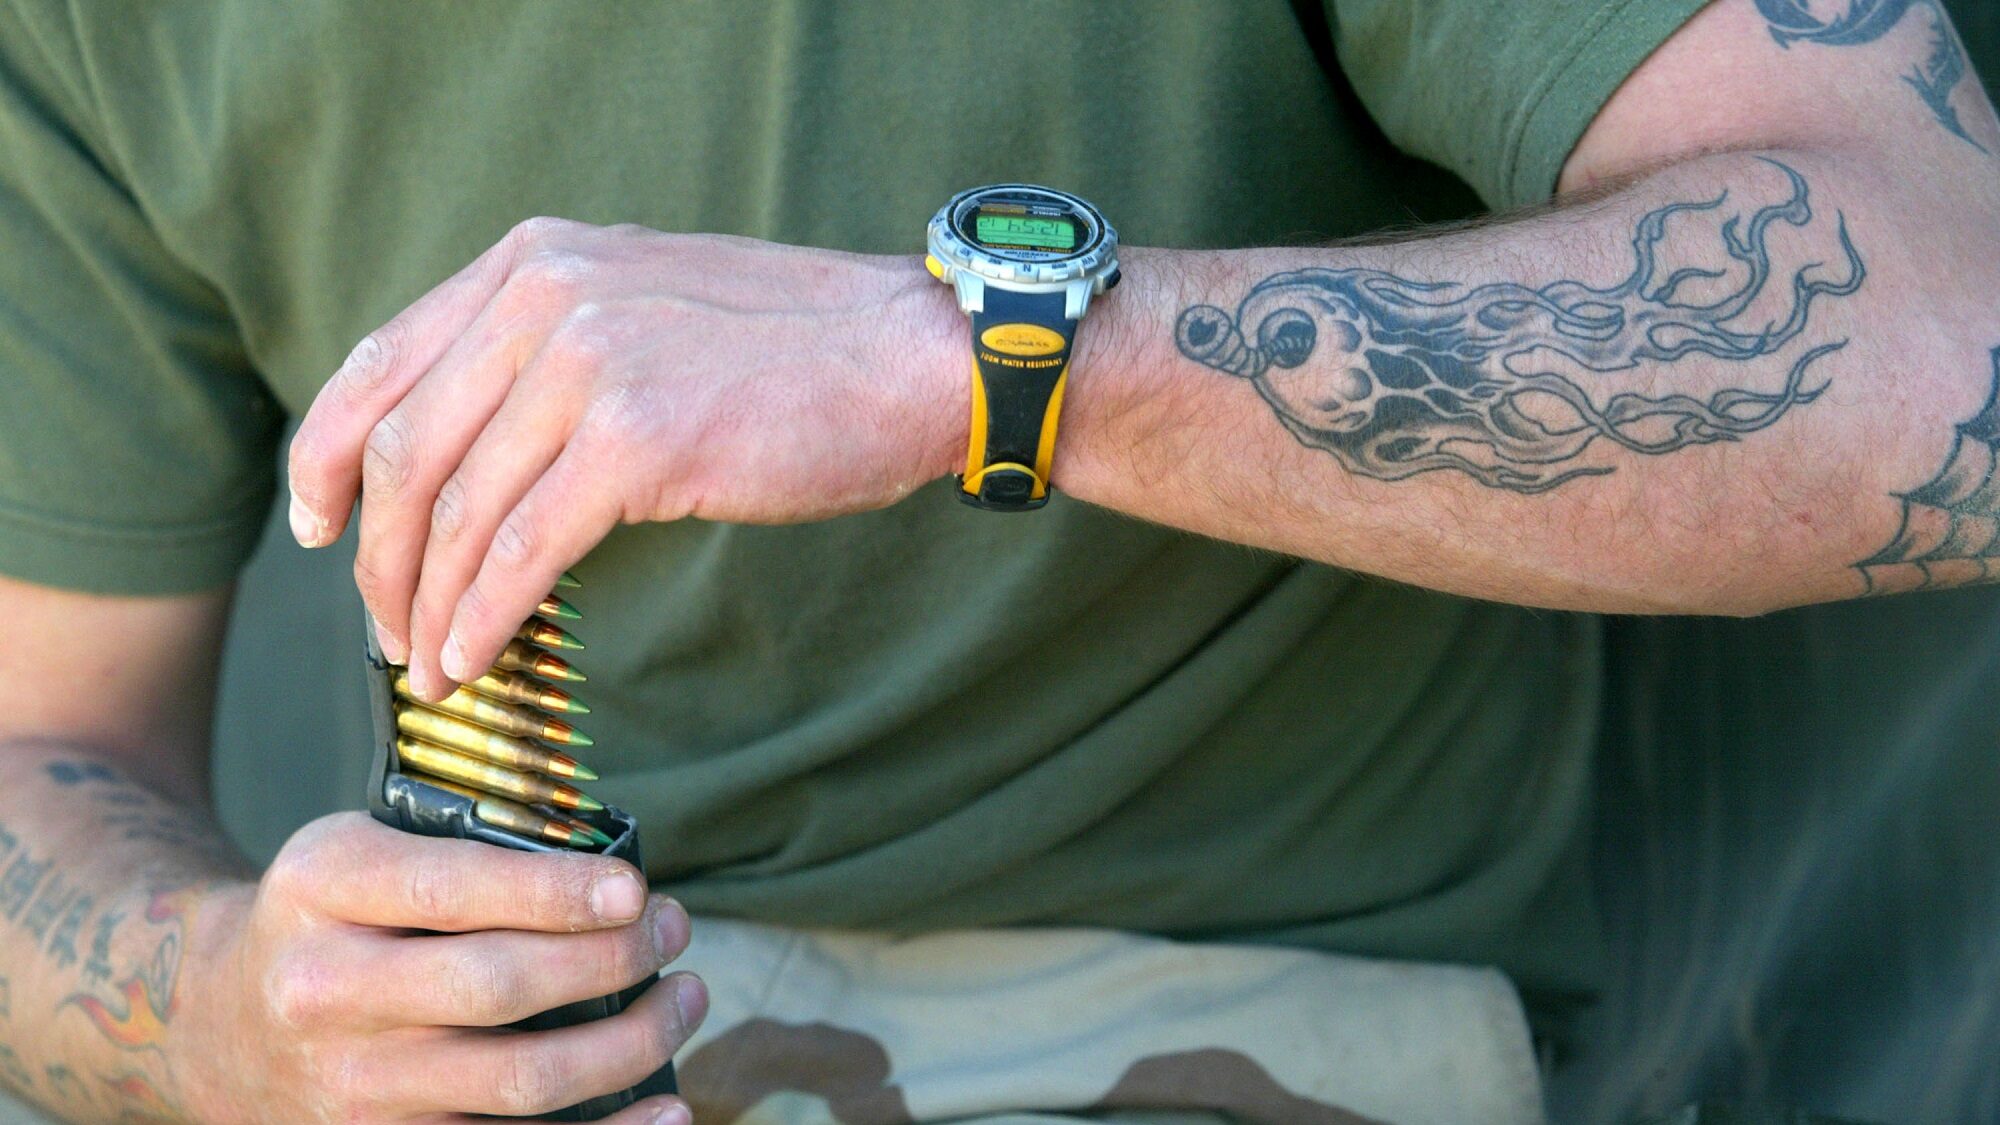 The Marine Corps is considering major changes to its tattoo policy